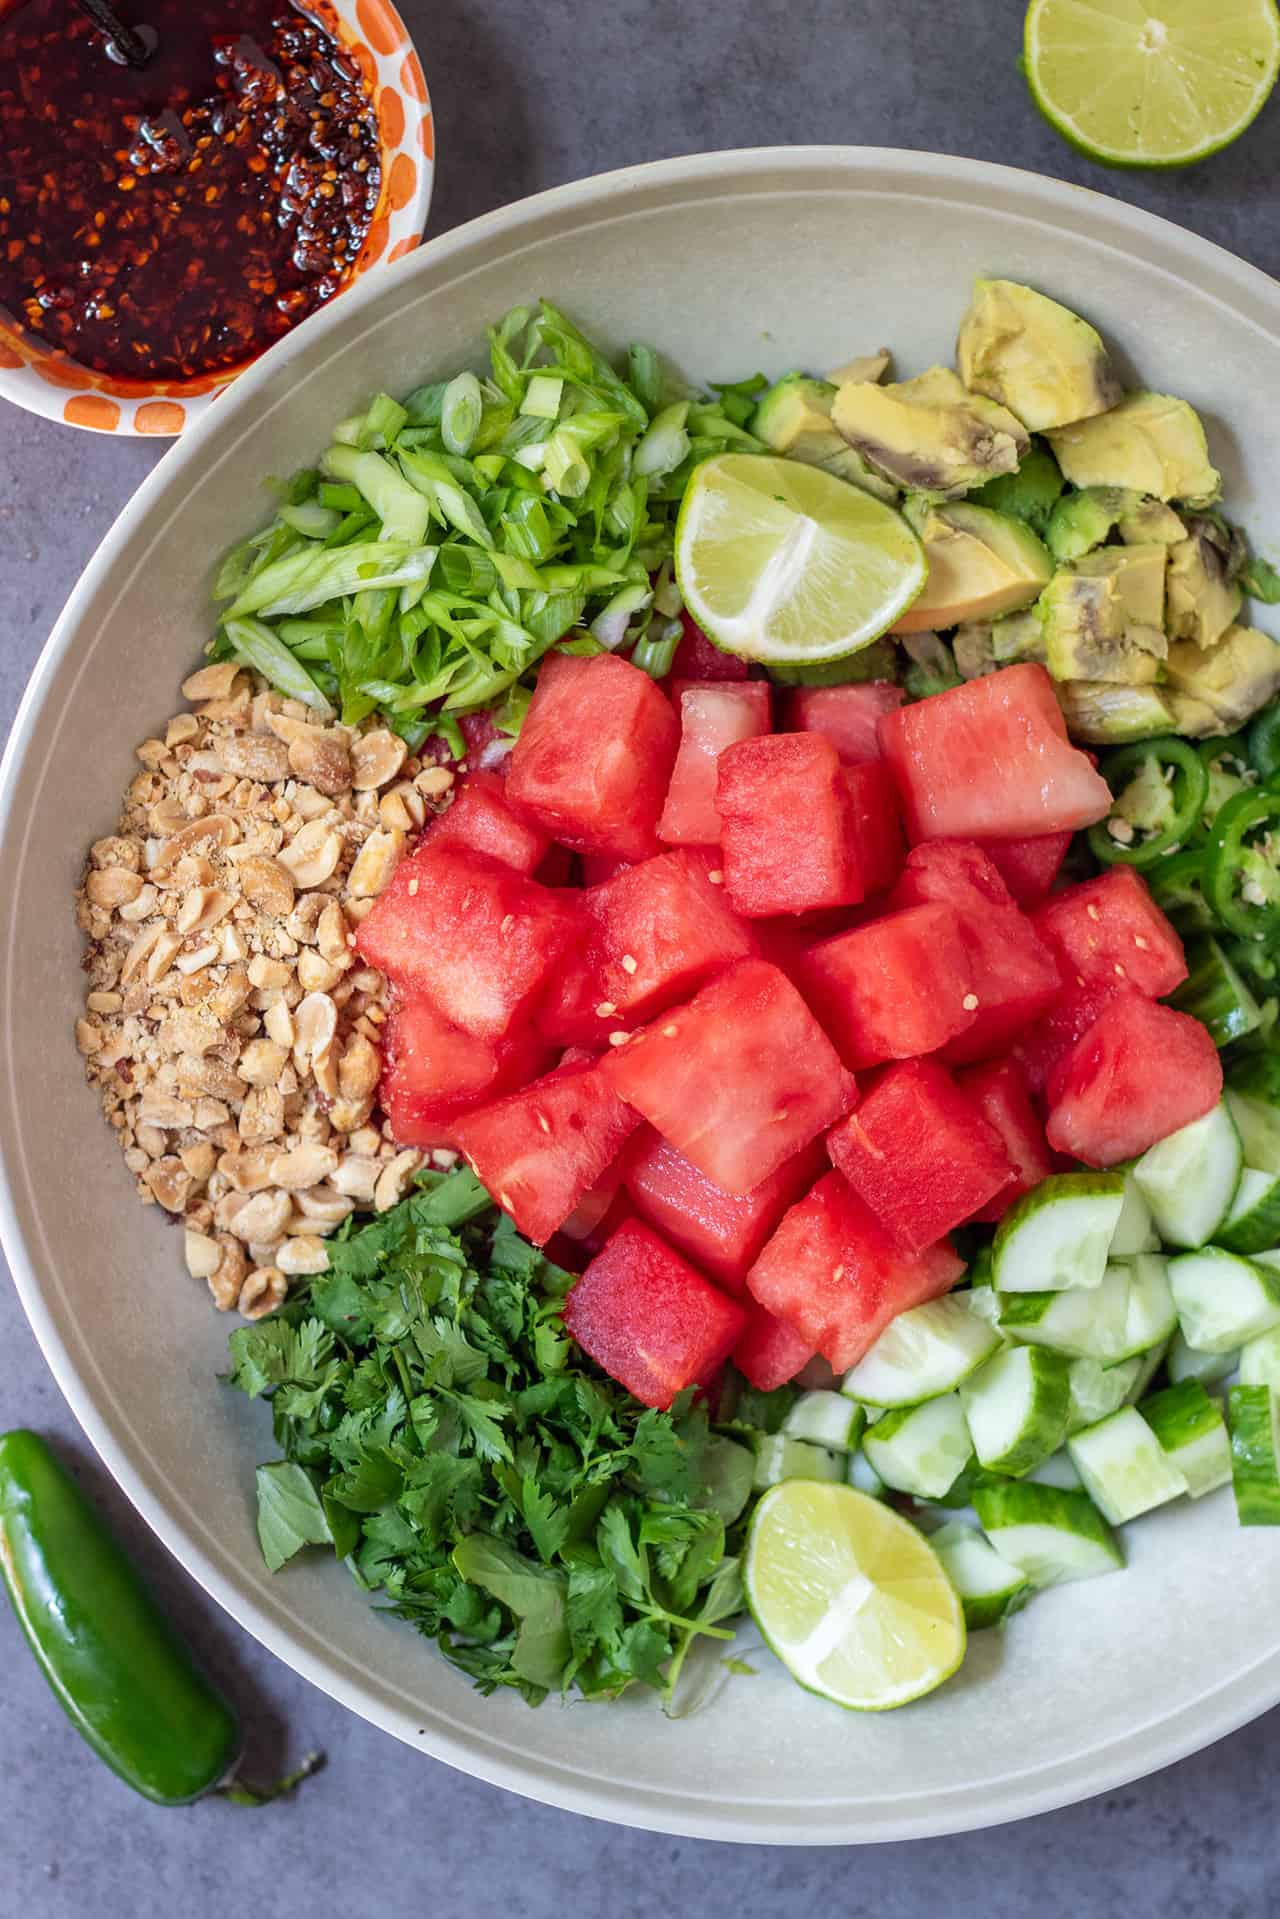 A large round serving bowl with cubes of watermelon, diced cucumbers, diced avocado, sliced jalapeños, sliced scallions, crushed peanuts, and fresh chopped herbs. There's a small bowl filled with chili crunch oil in the background.